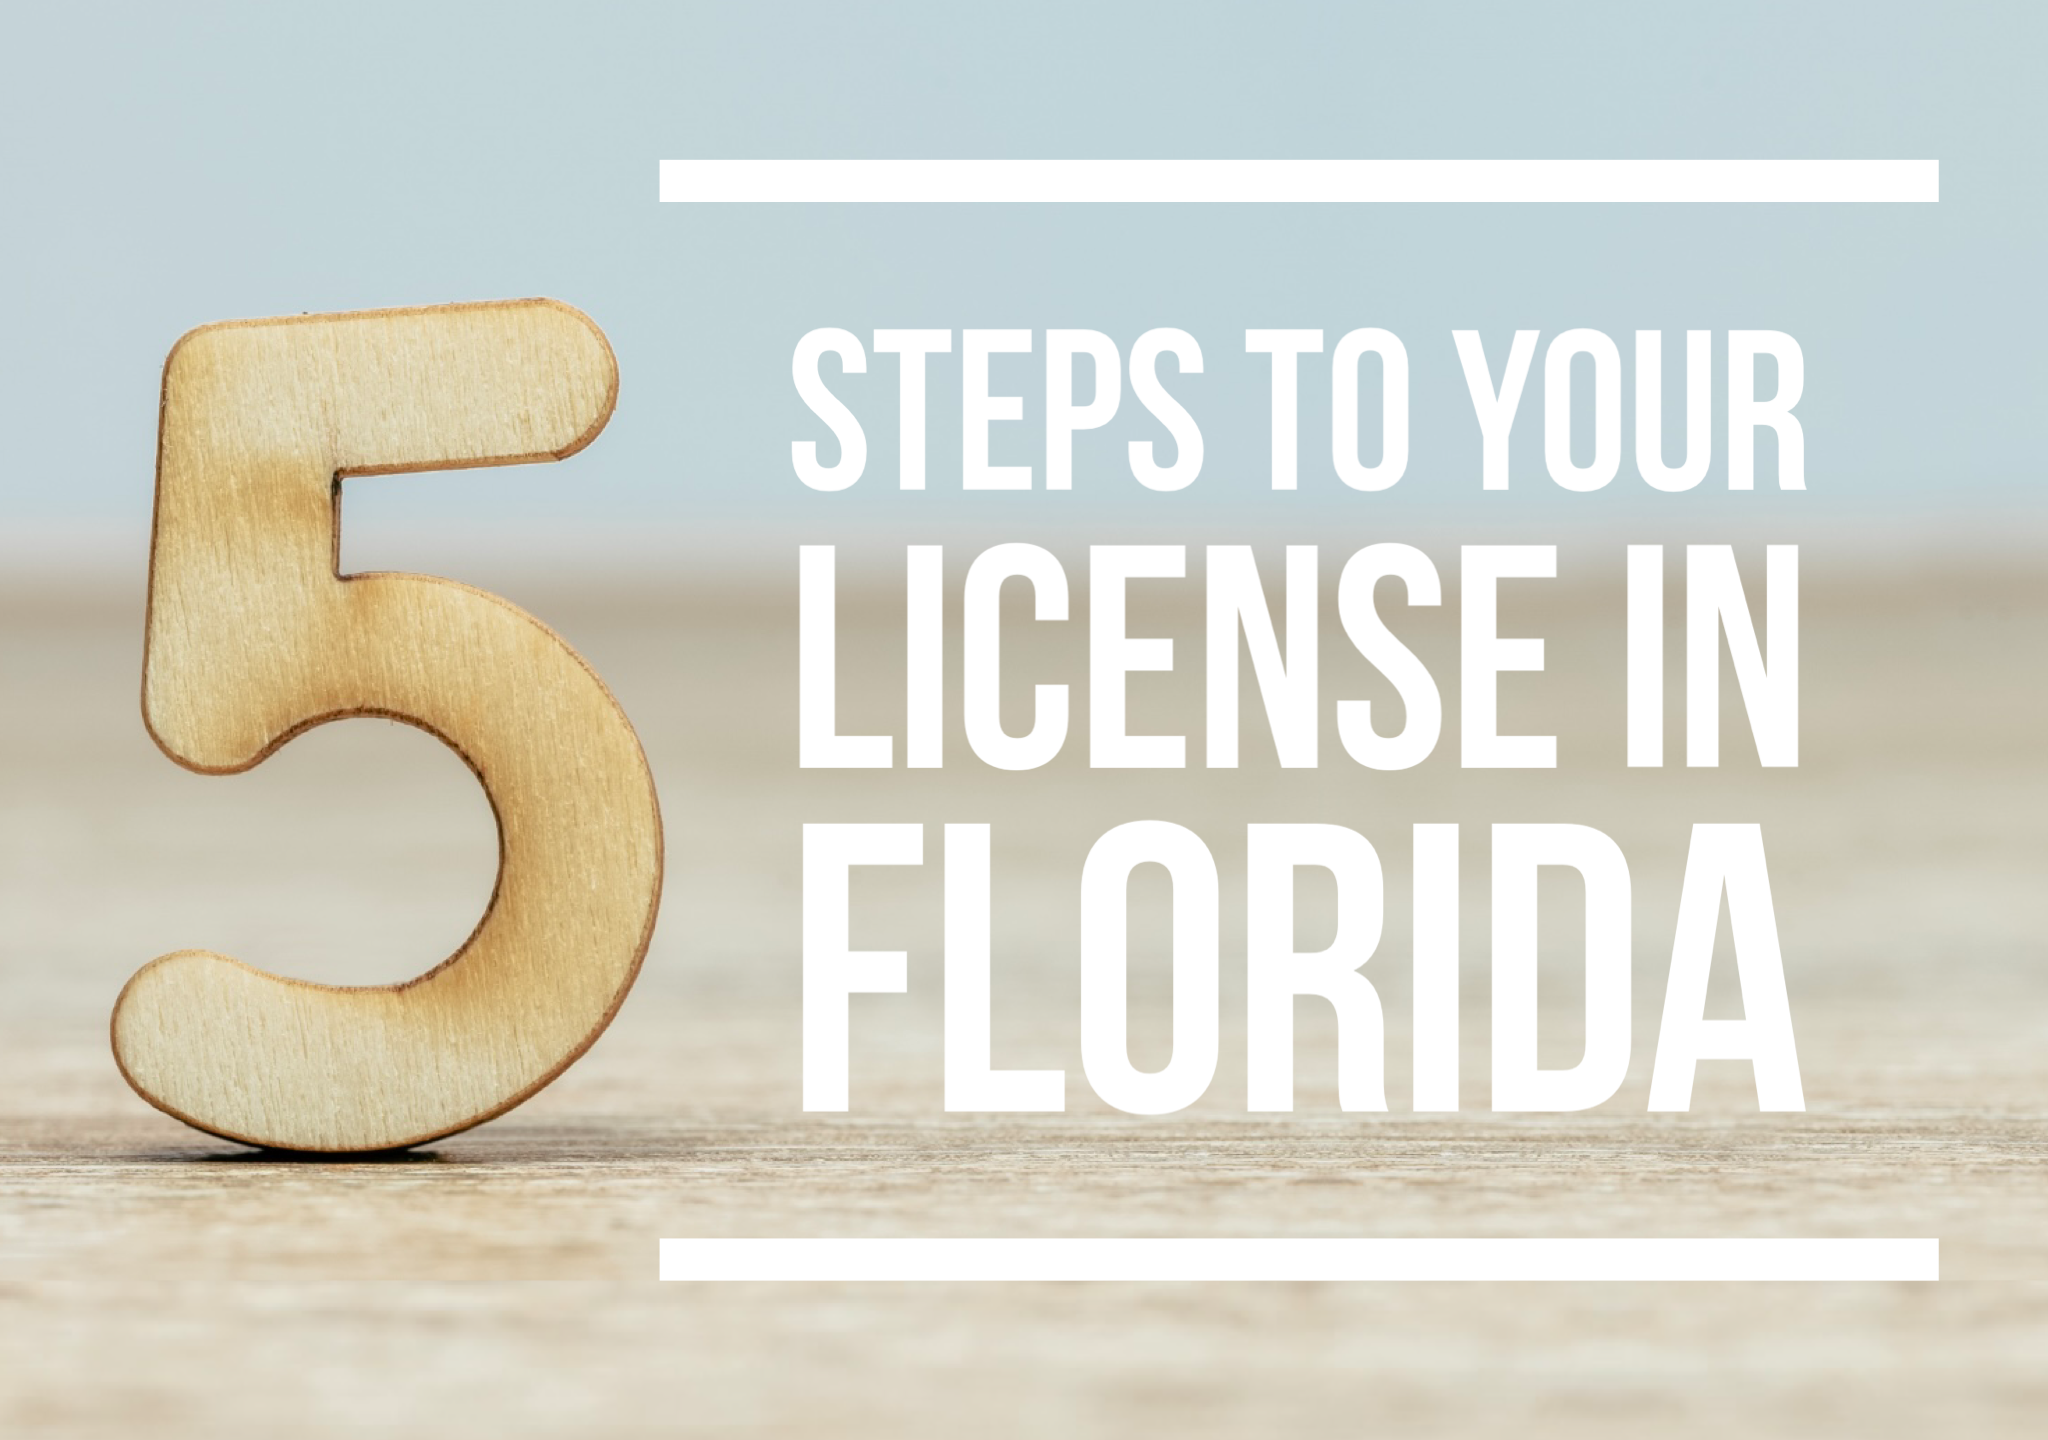 5 Steps To Your License in Florida